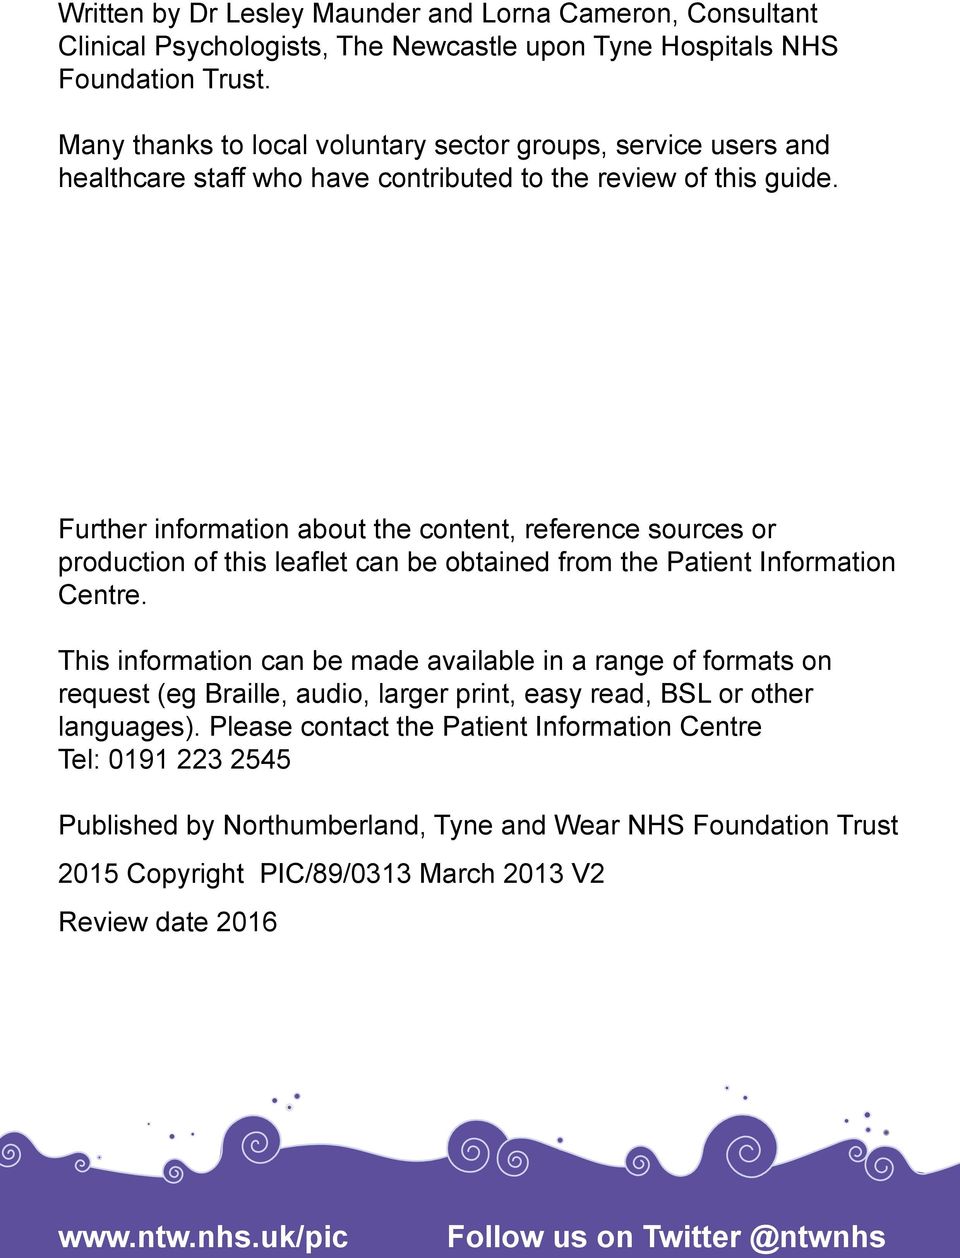 Further information about the content, reference sources or production of this leaflet can be obtained from the Patient Information Centre.